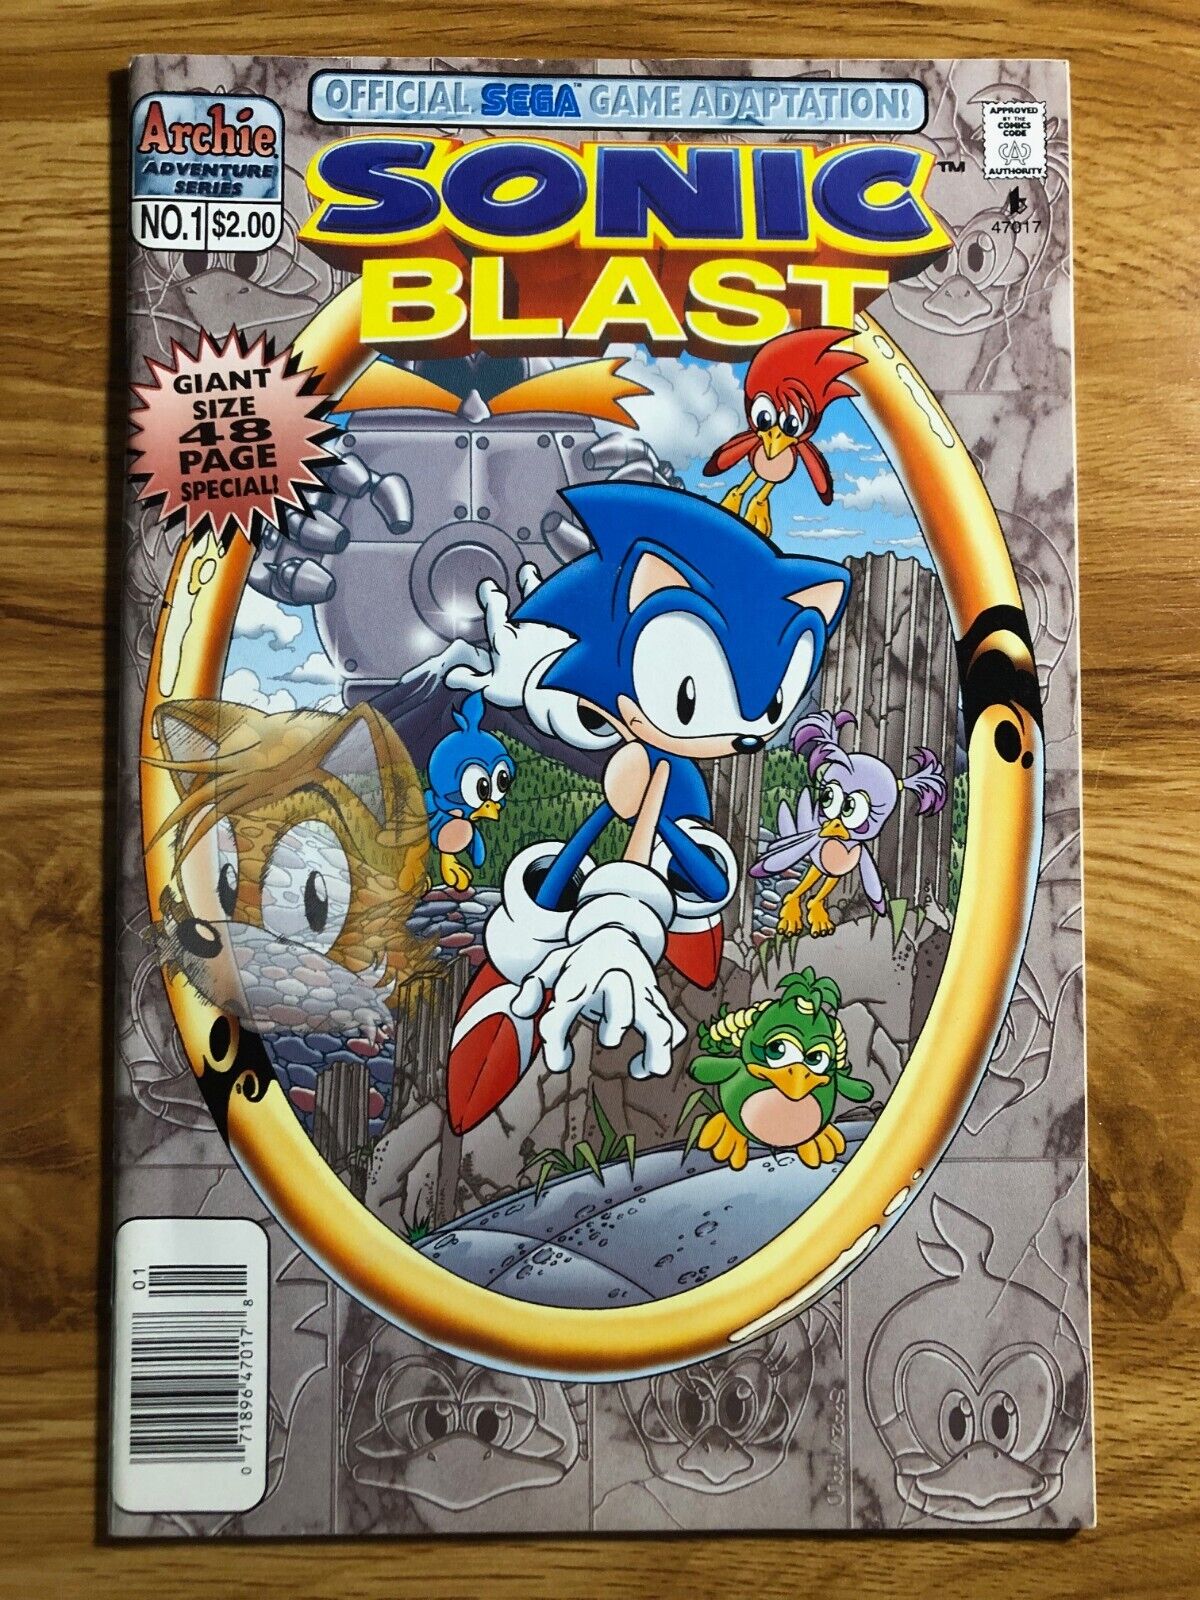 Sonic Blast Special # 1 (1997 Archie) 48-Page Official Sega Game Adaptation NM-